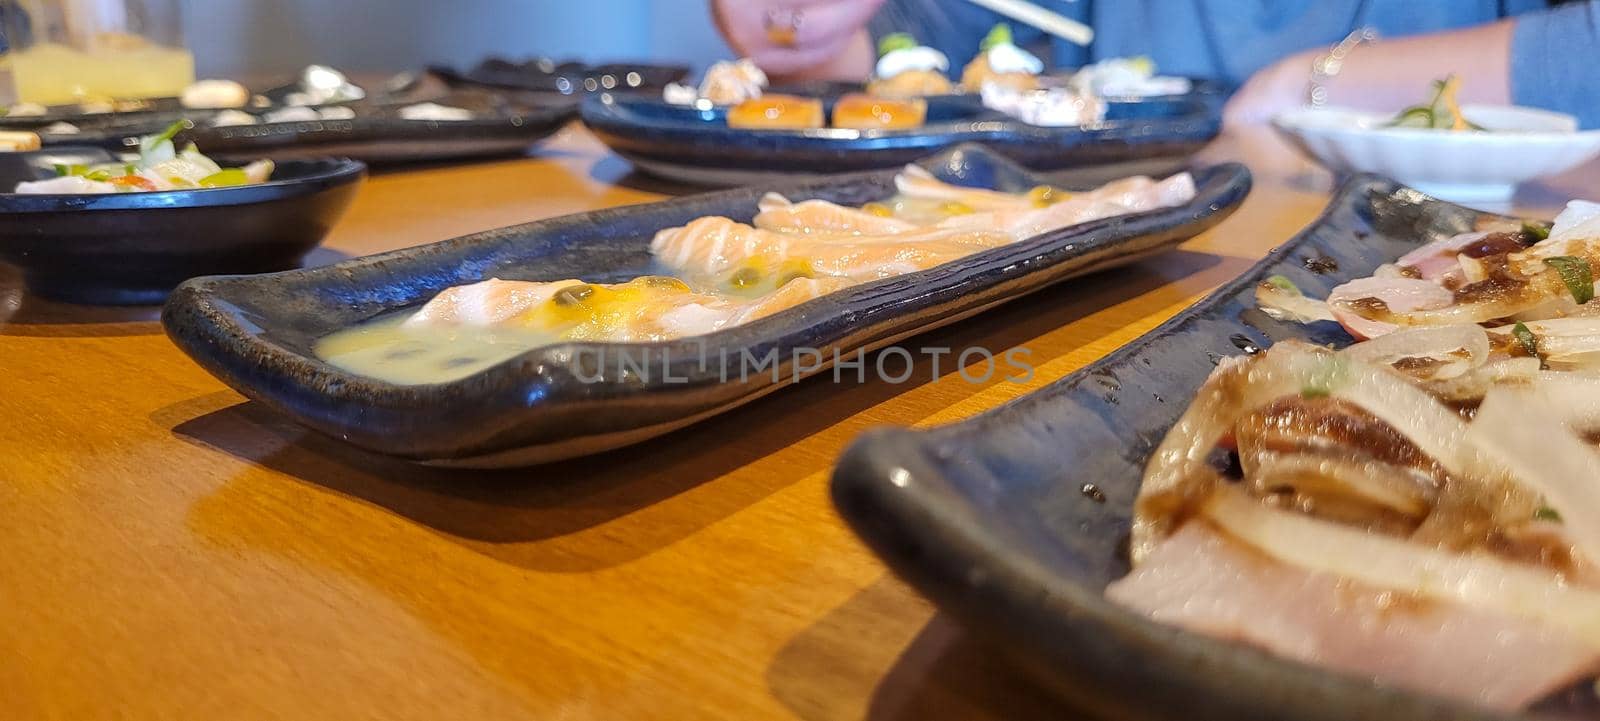 japanese food dish in an oriental restaurant with wooden table and light background